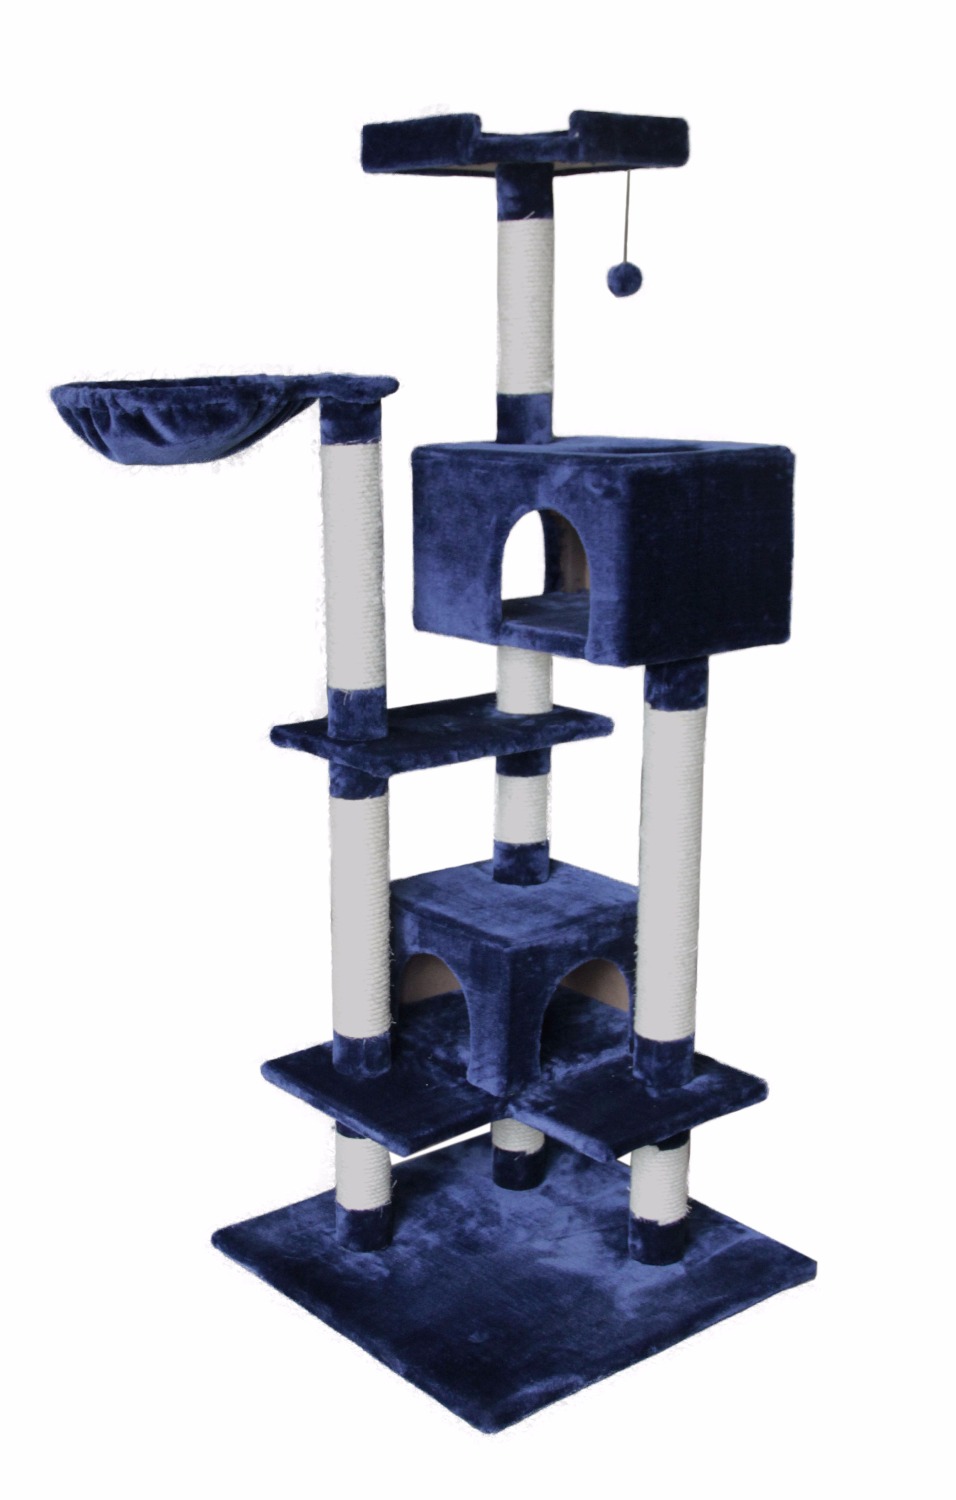 Domestic Delivery Cat Toy Cat House Swinging the Ball Scratching Wood Climbing Tree Luxury Climbing Frame Kitten Furniture Funny